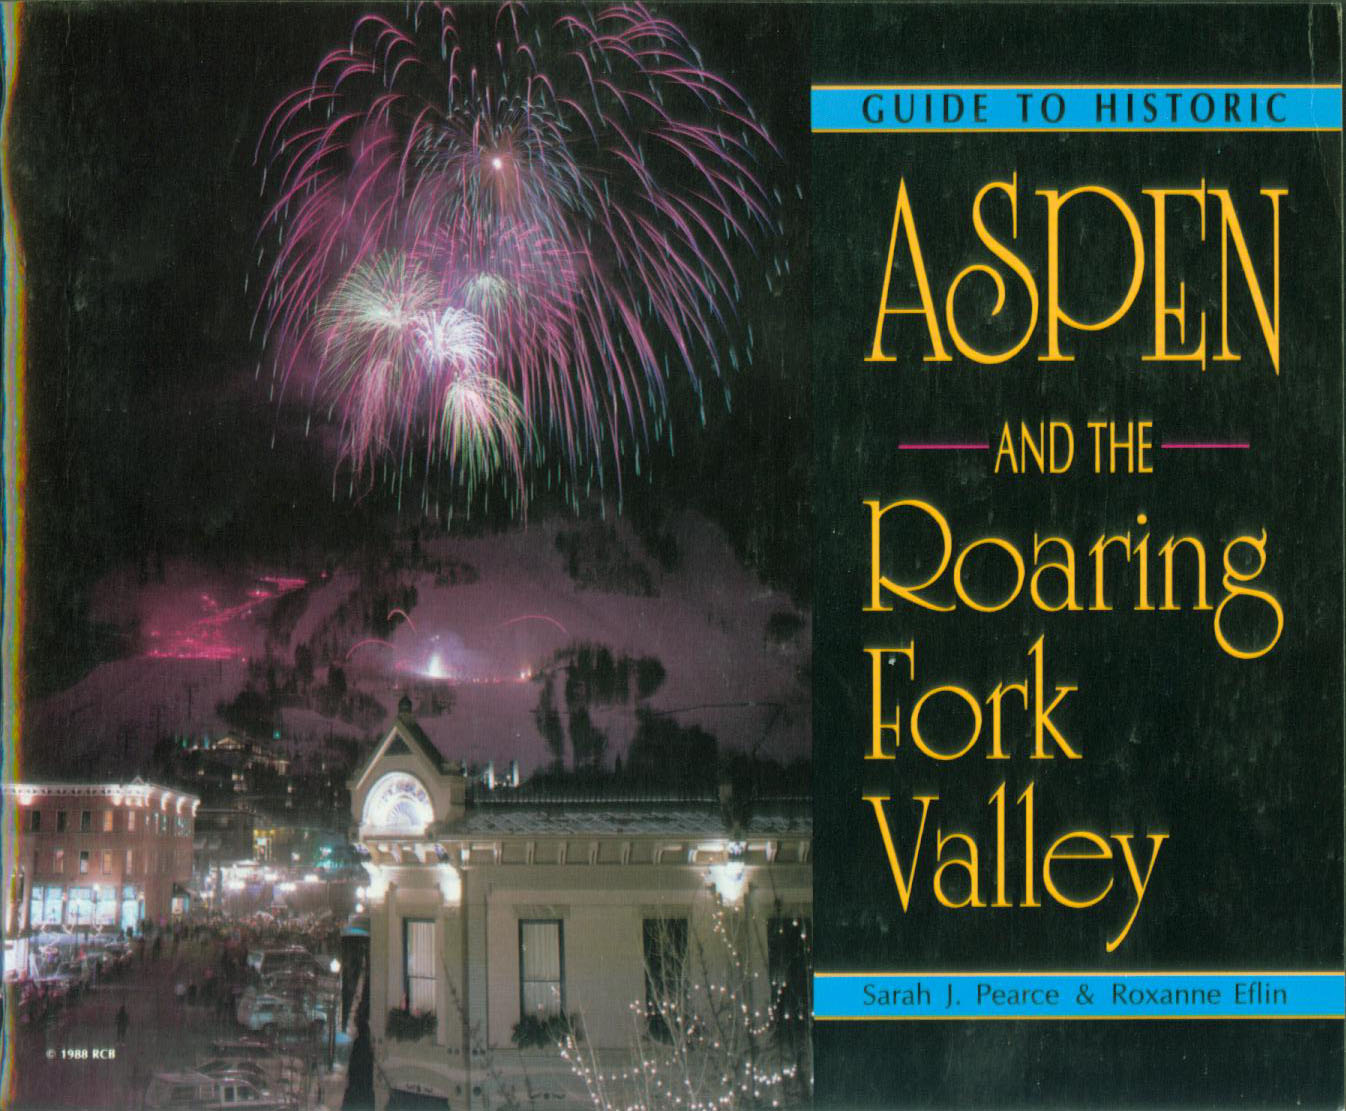 GUIDE TO HISTORIC ASPEN AND THE ROARING FORK VALLEY.